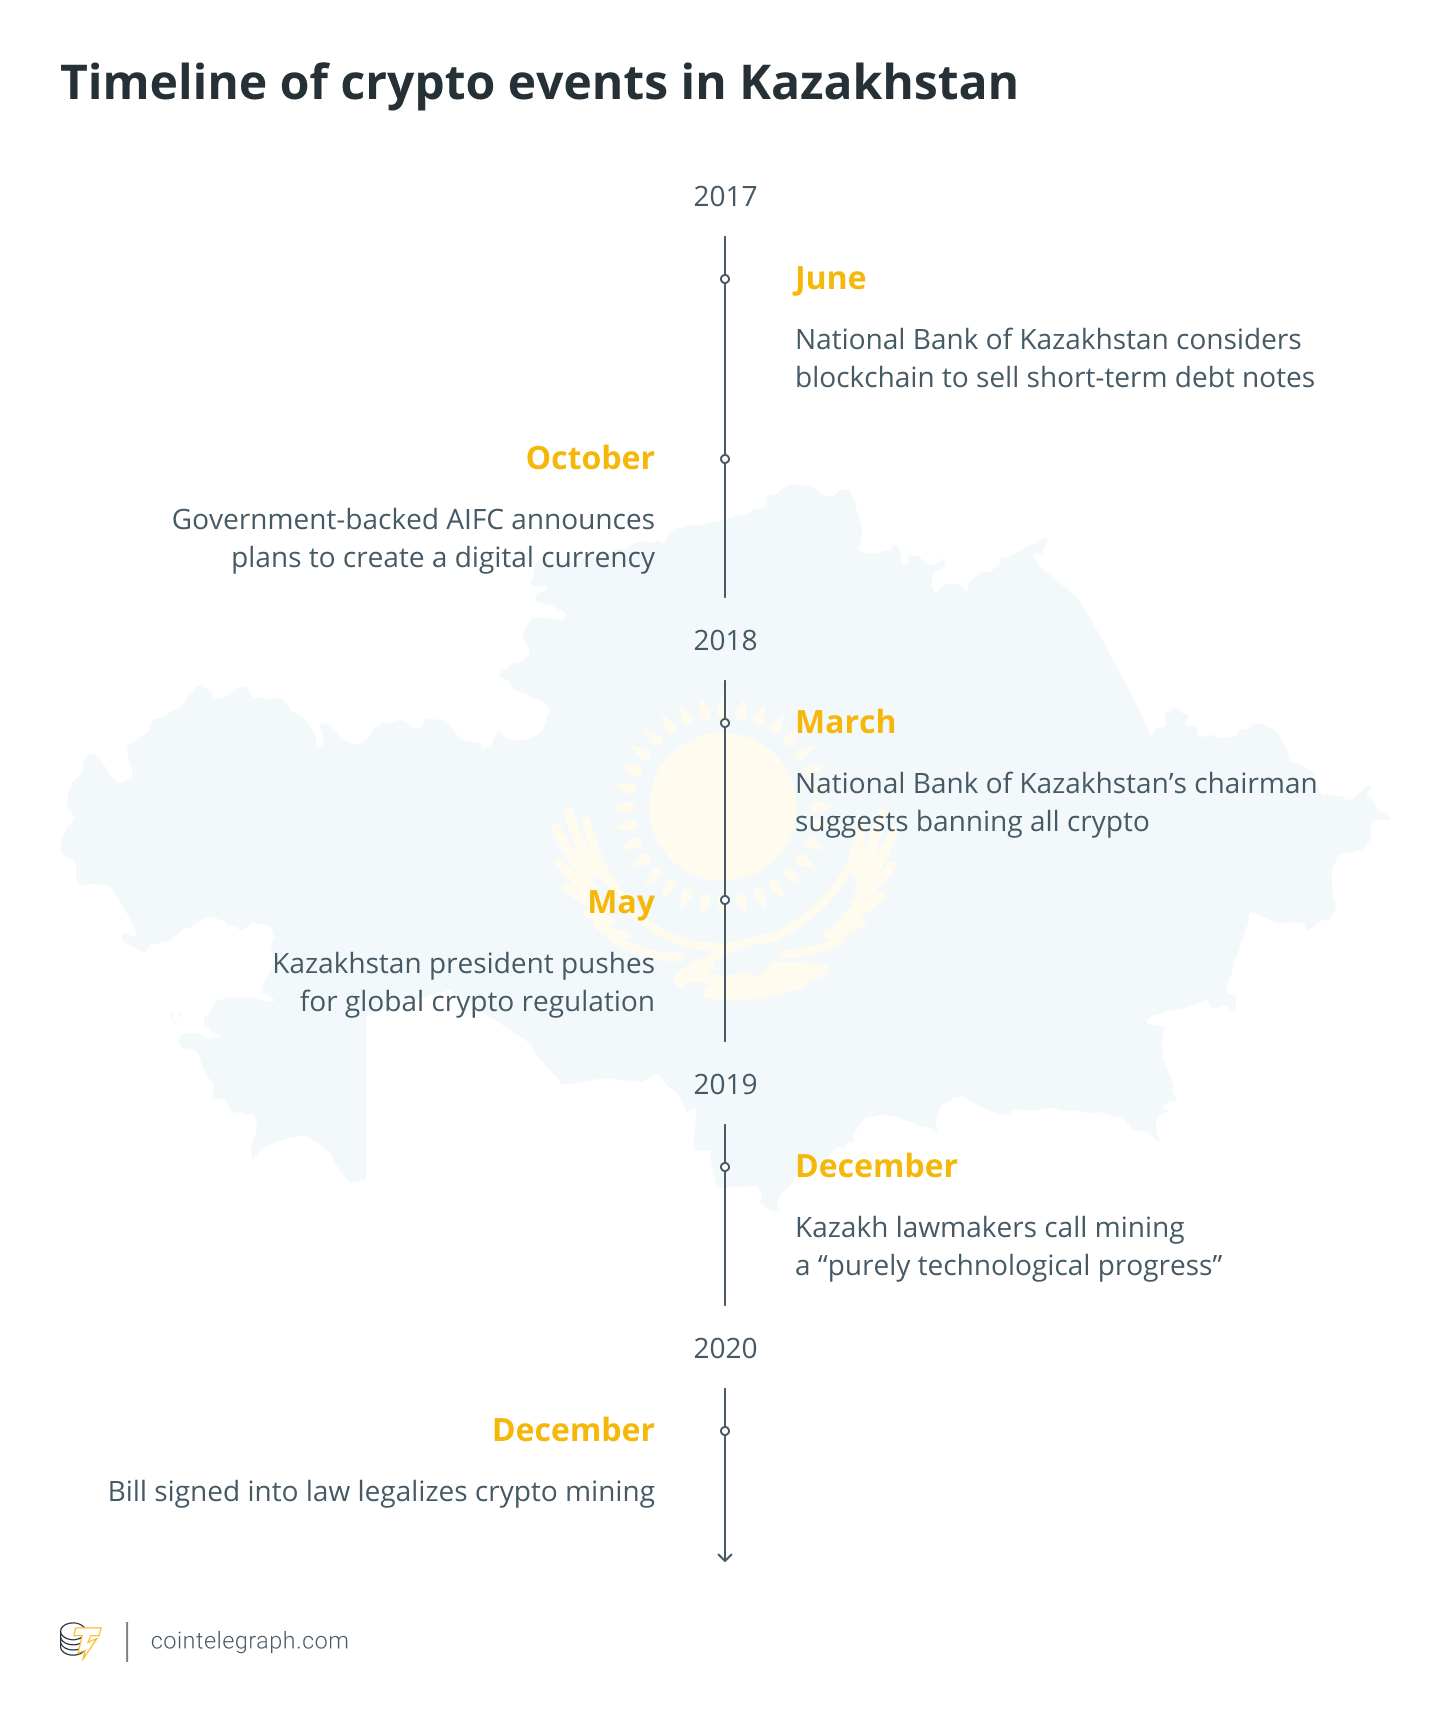 Timeline of crypto events in Kazakhstan